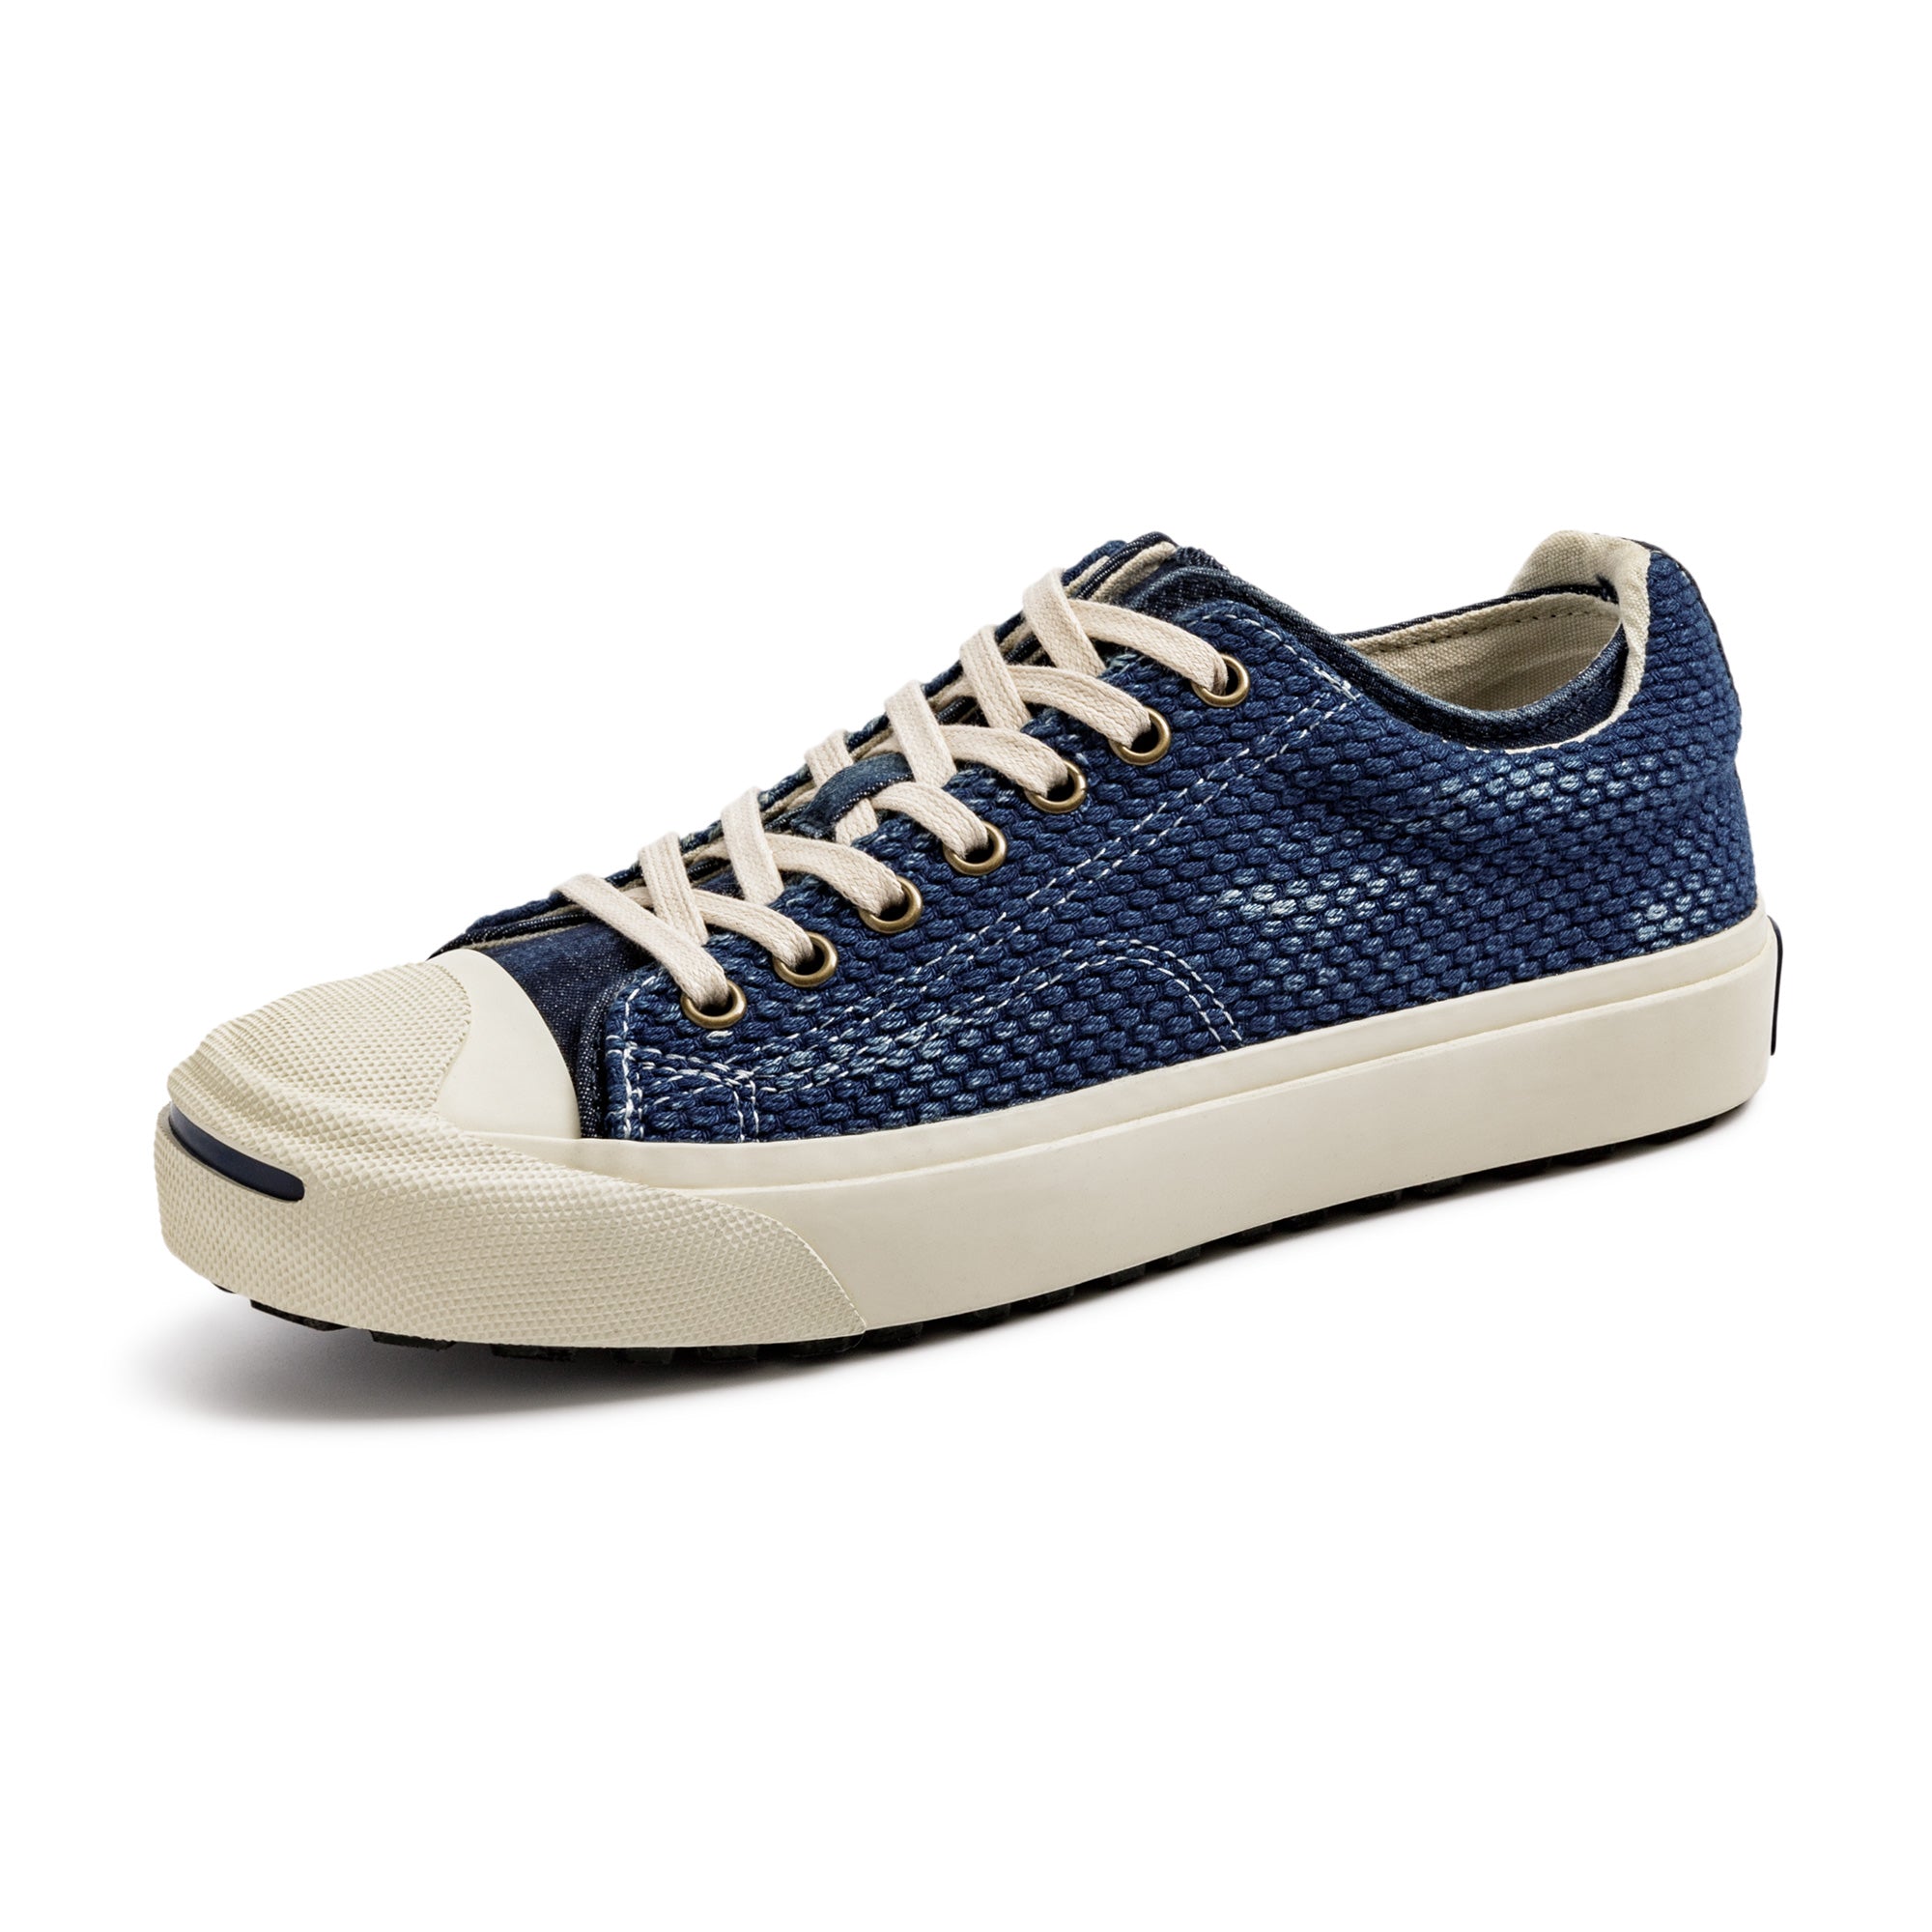 Men's Washed Denim Canvas Shoes Trendy Sashiko Embroidered Low Tops